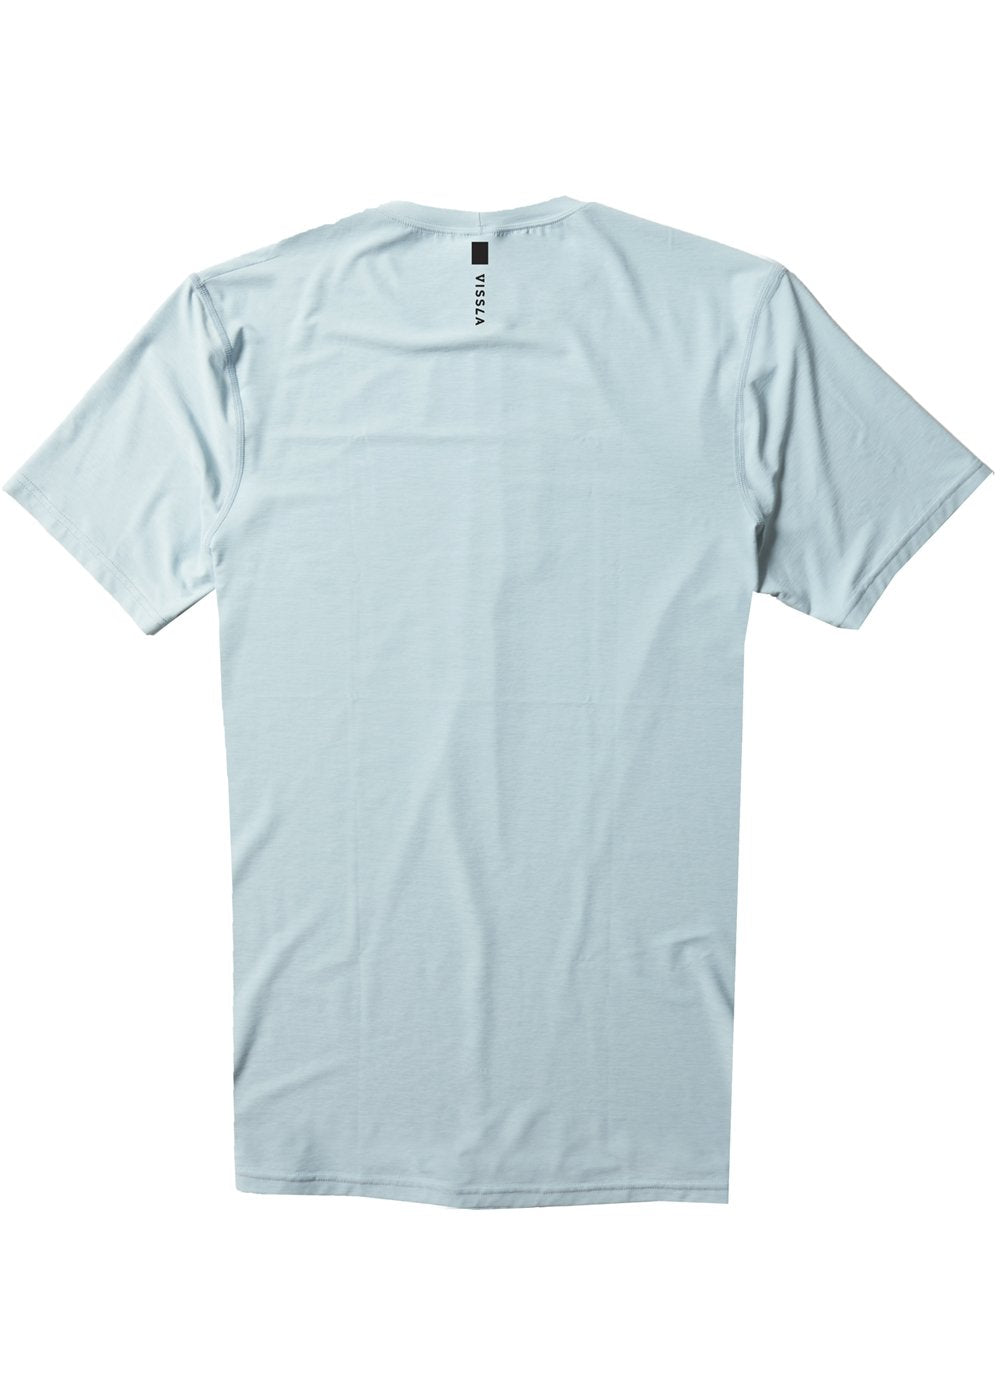 Vissla Men's cool blue heather twisted eco short sleeve with a black and white Vissla logo on the wearer's upper left chest